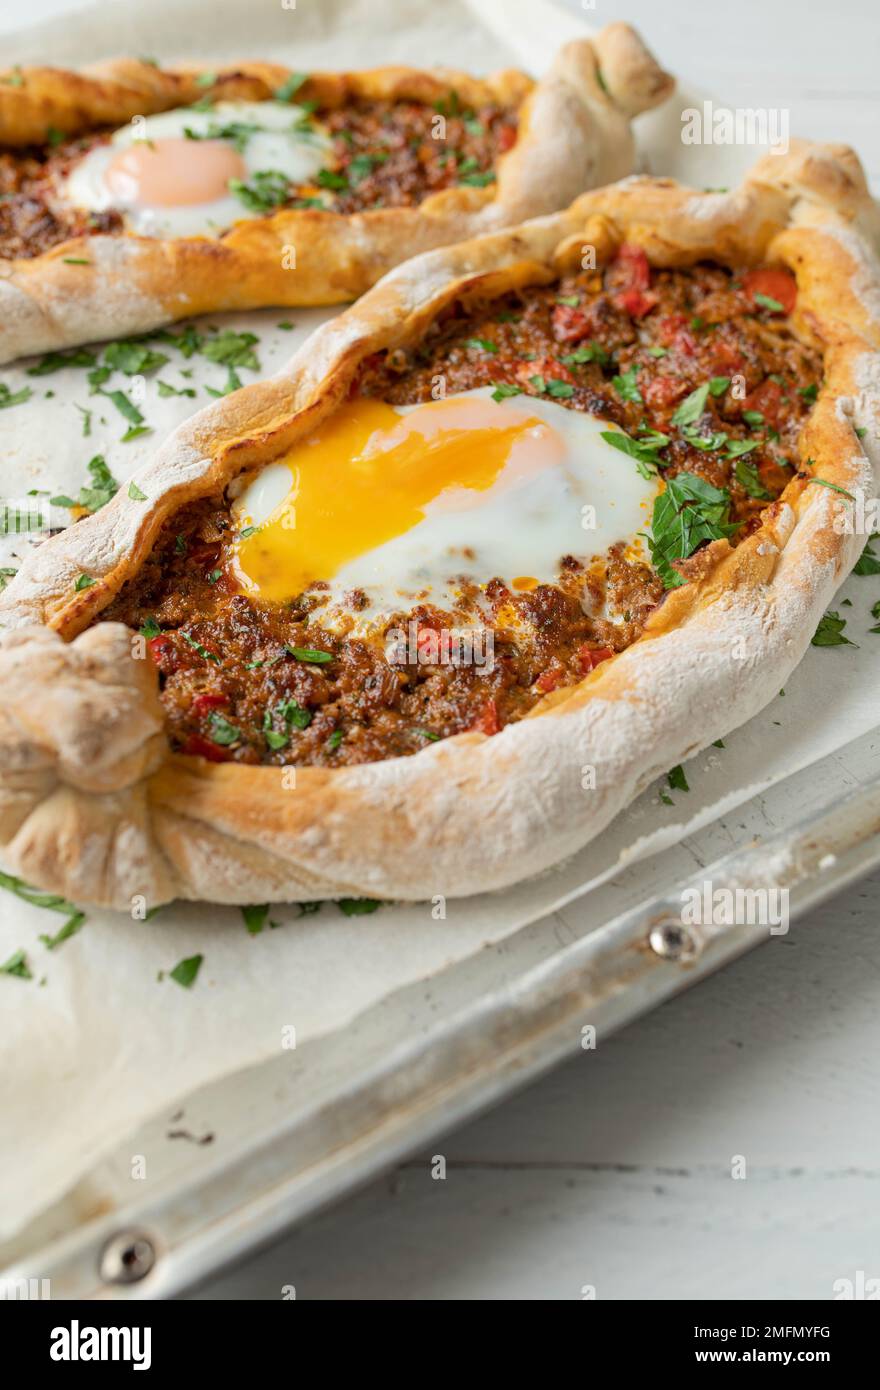 Turkish pide with ground beef, vegetable filling and egg Stock Photo